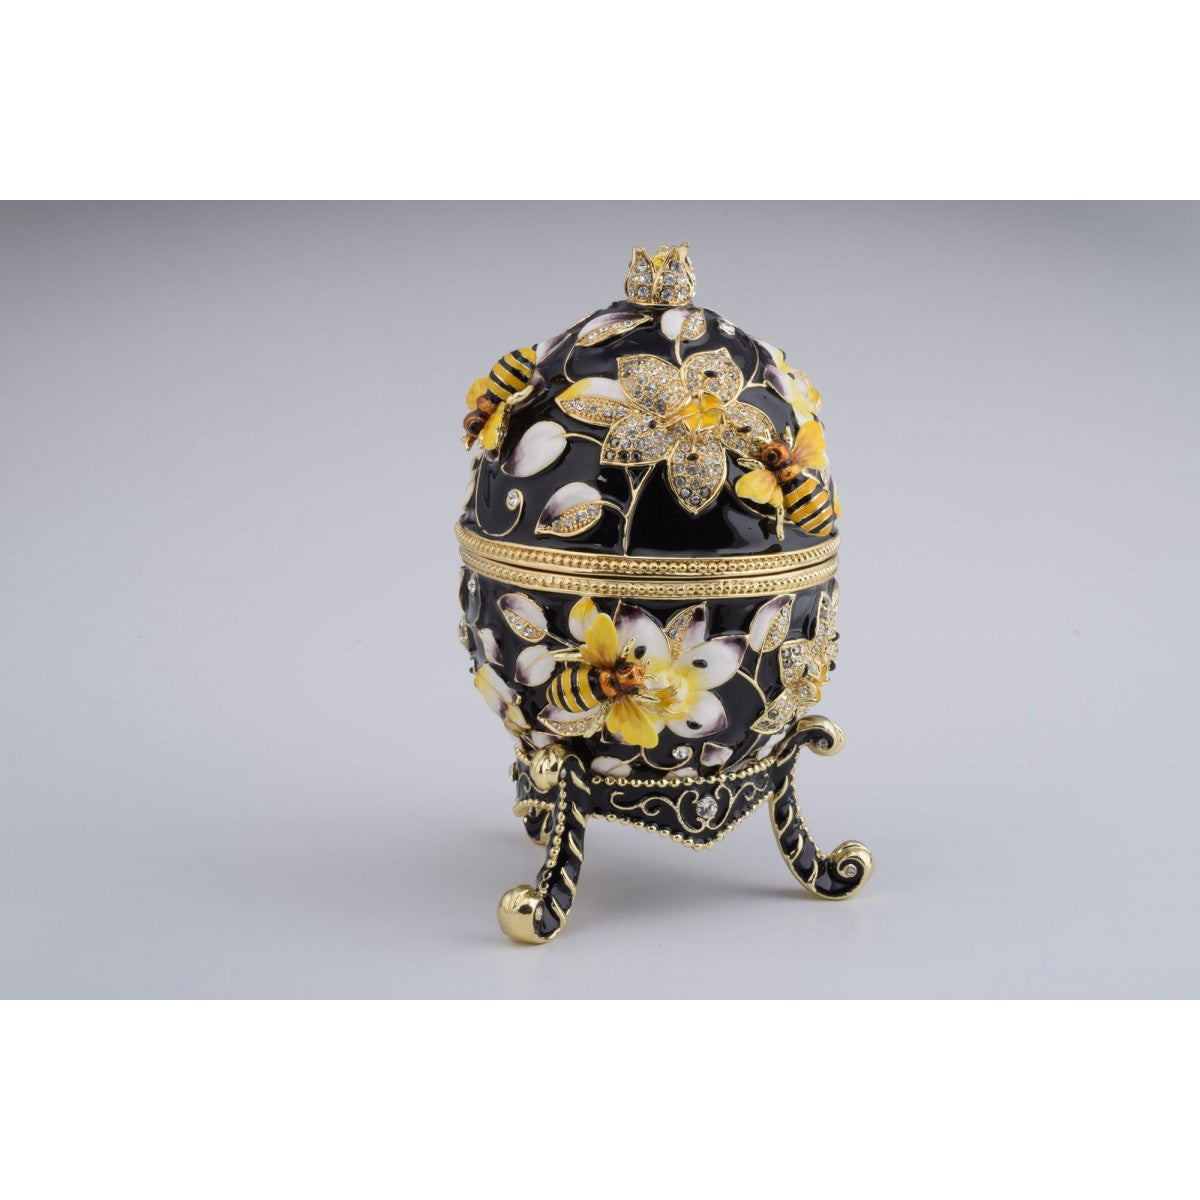 Black Faberge Style Egg Decorated with Bees and Flowers Trinket Box by Keren Kopal